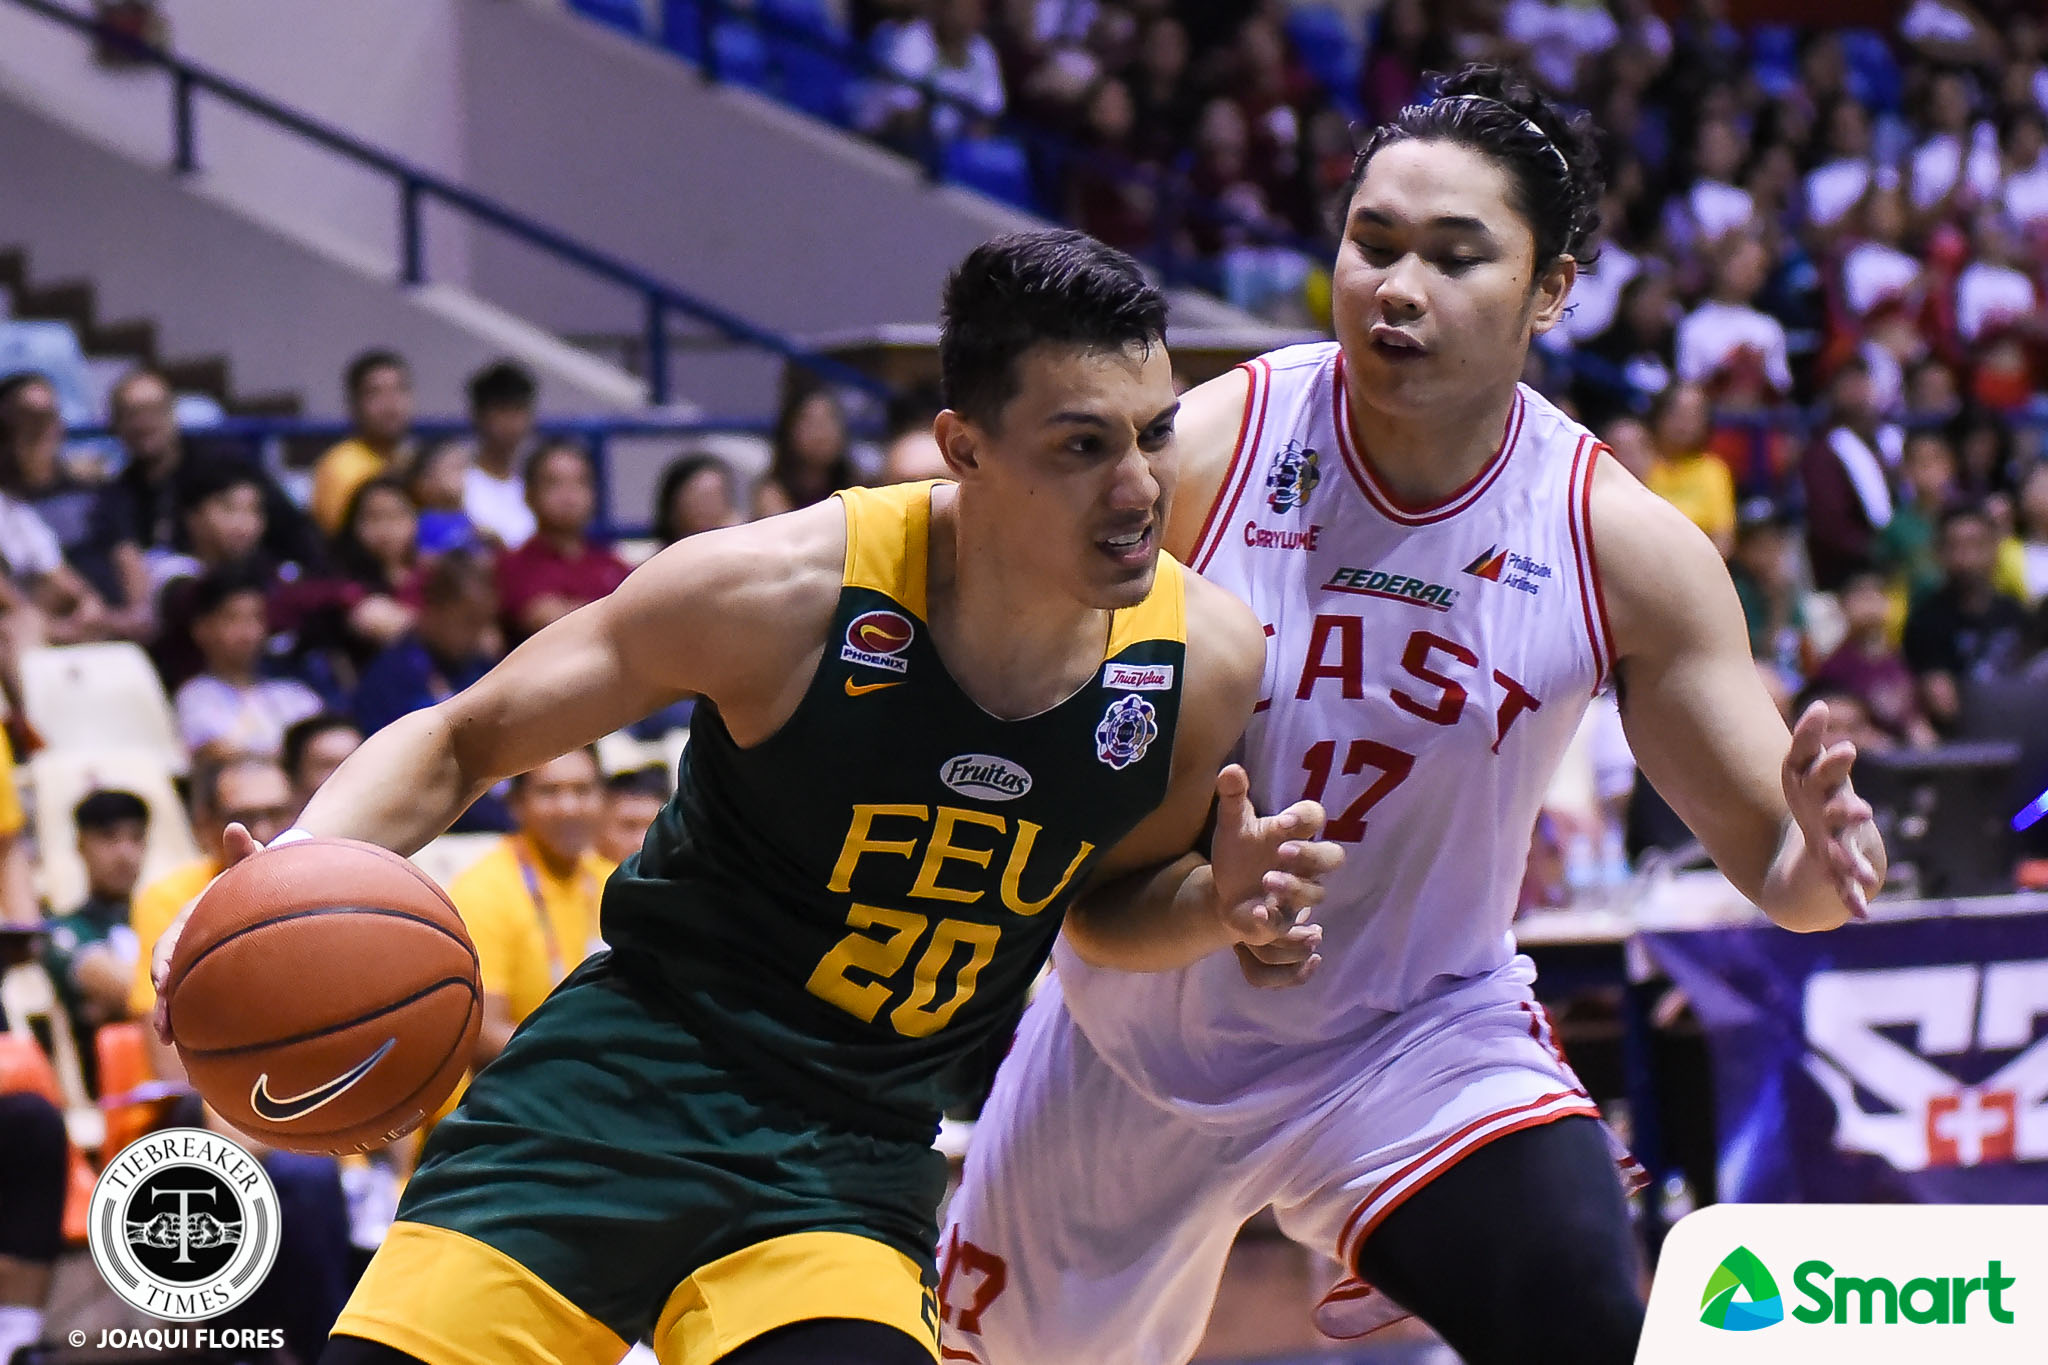 UAAP-82-MBB-FEU-vs.-UE-Tuffin-6312 Ino Comboy not satisfied with making fifth Final Four: 'We want more' Basketball FEU News UAAP  - philippine sports news